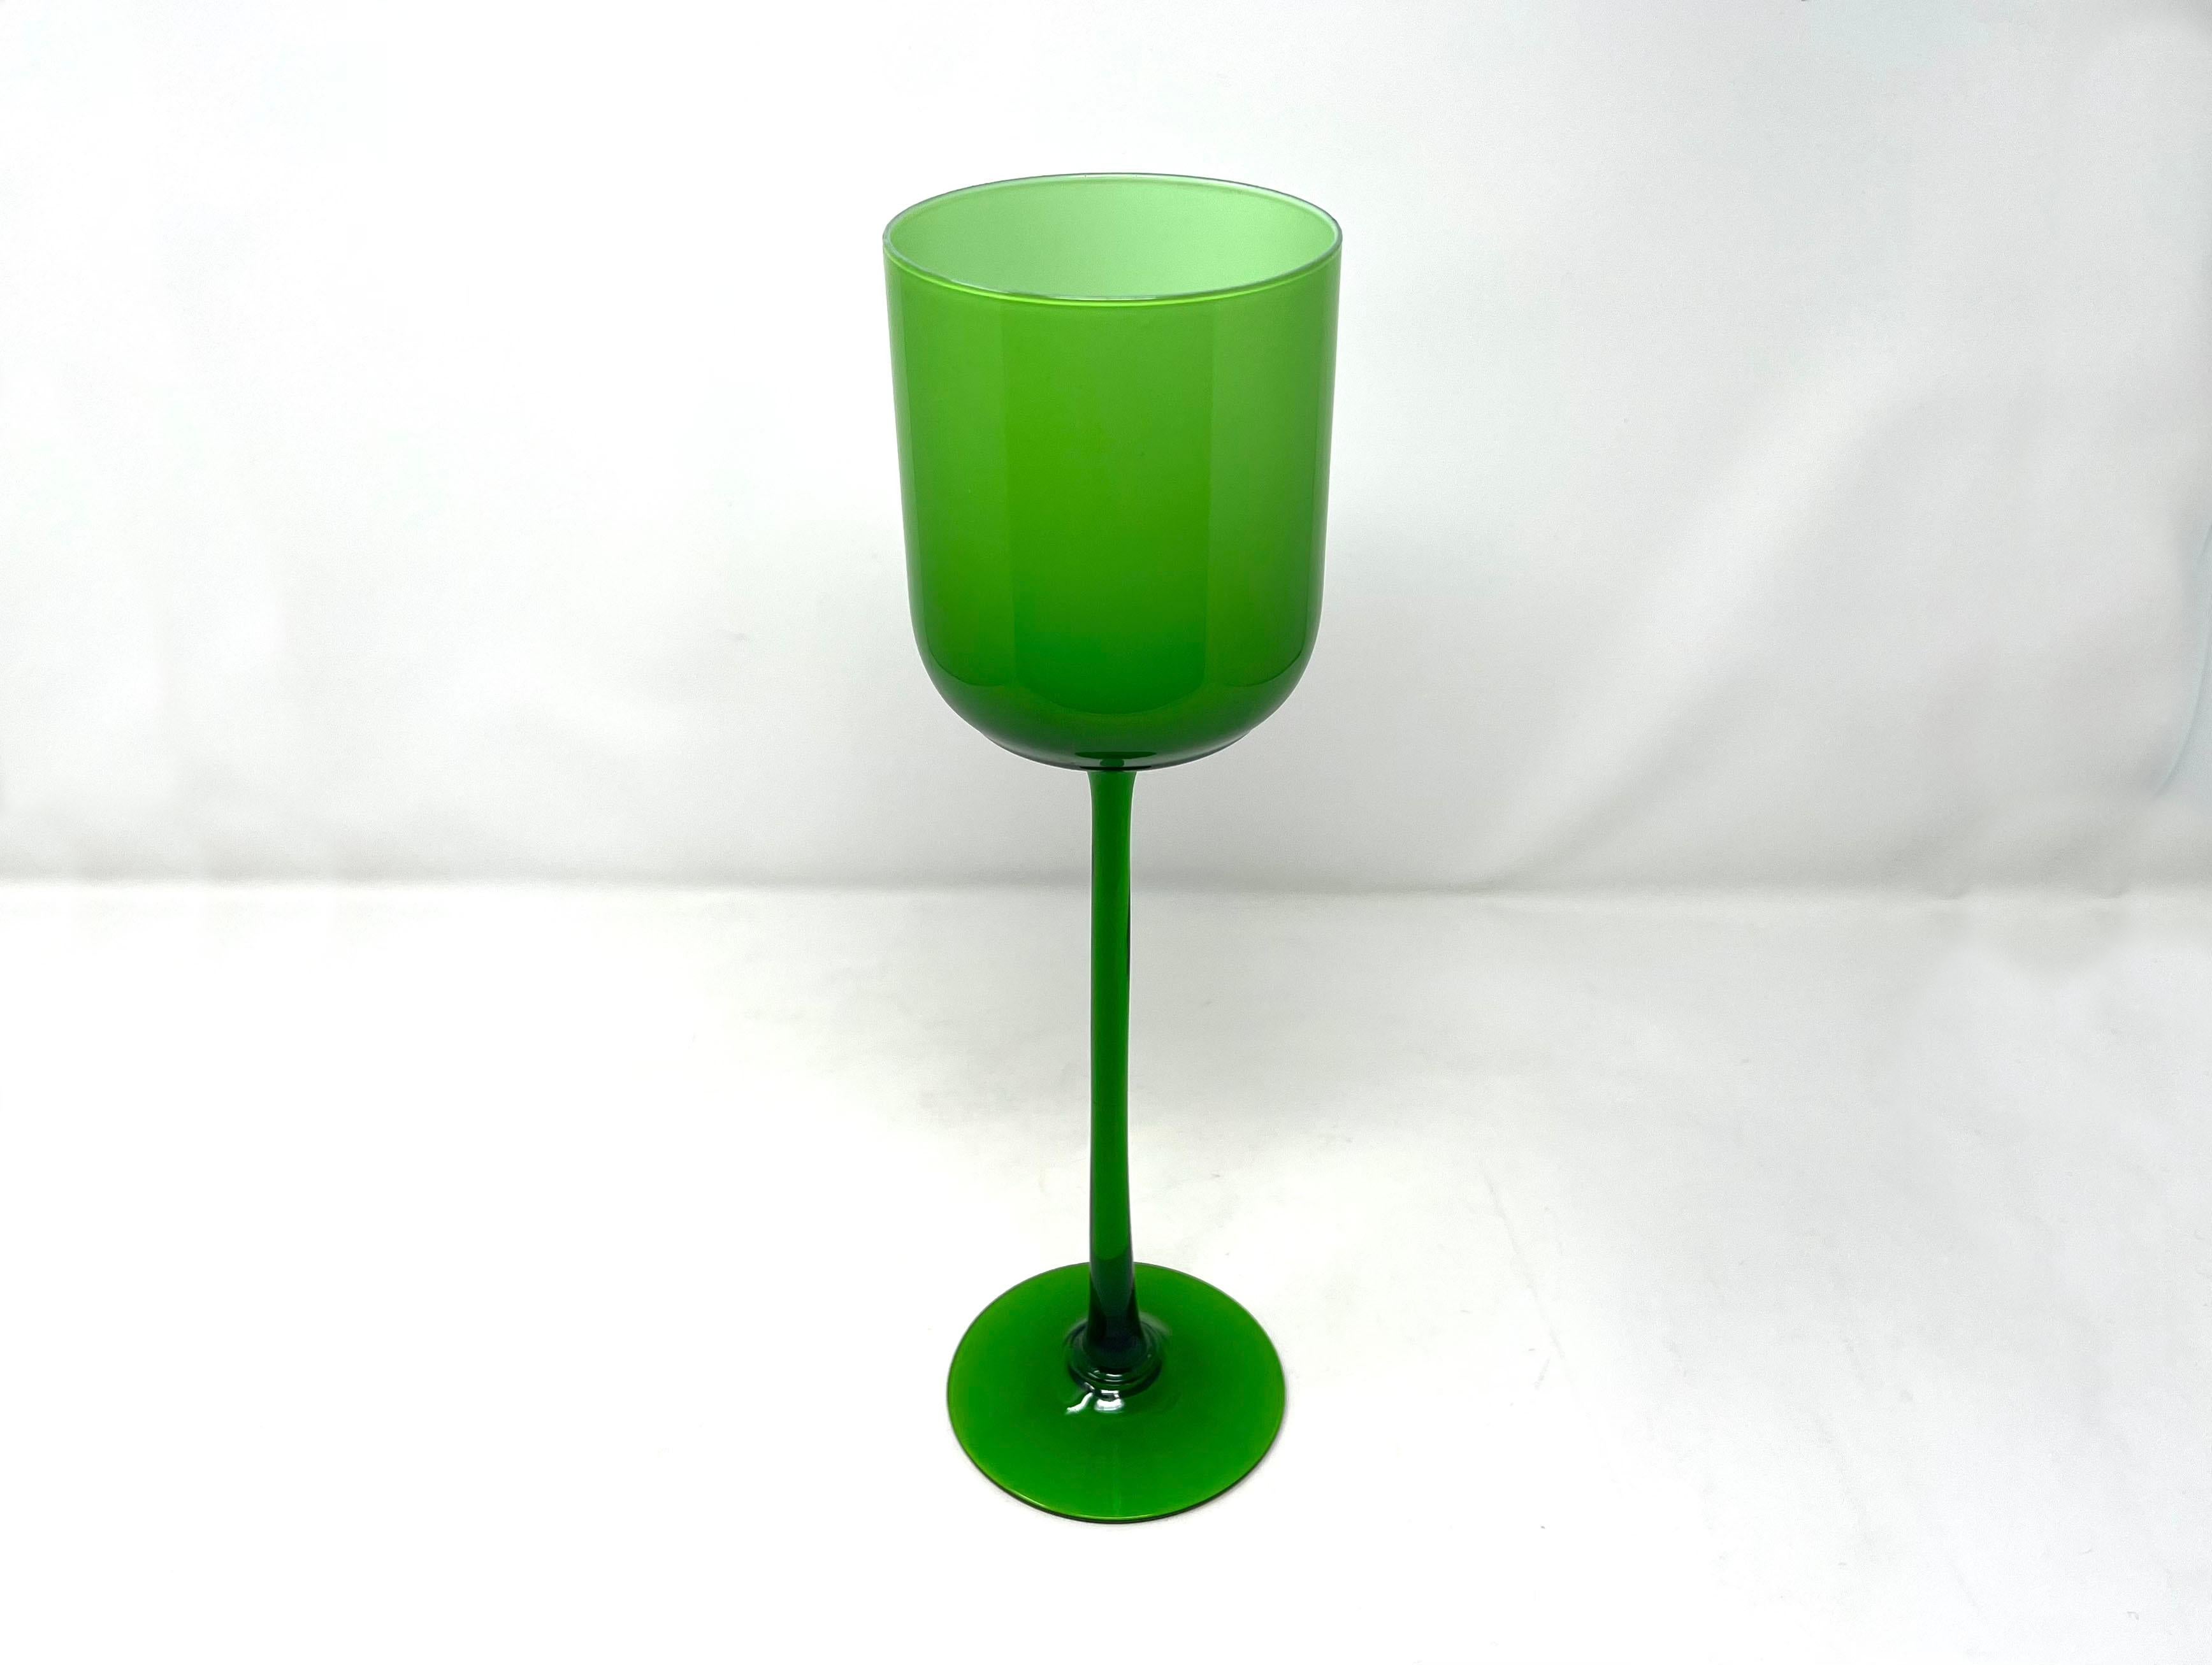 Super tall, stunning kelly green cased glass goblet. Opaque white on interior; translucent green on exterior. Graceful stem. No makers marks but possibly from the Empoli region in Italy in the 1970s. Or even Carlo Moretti.

Lovely for a collection